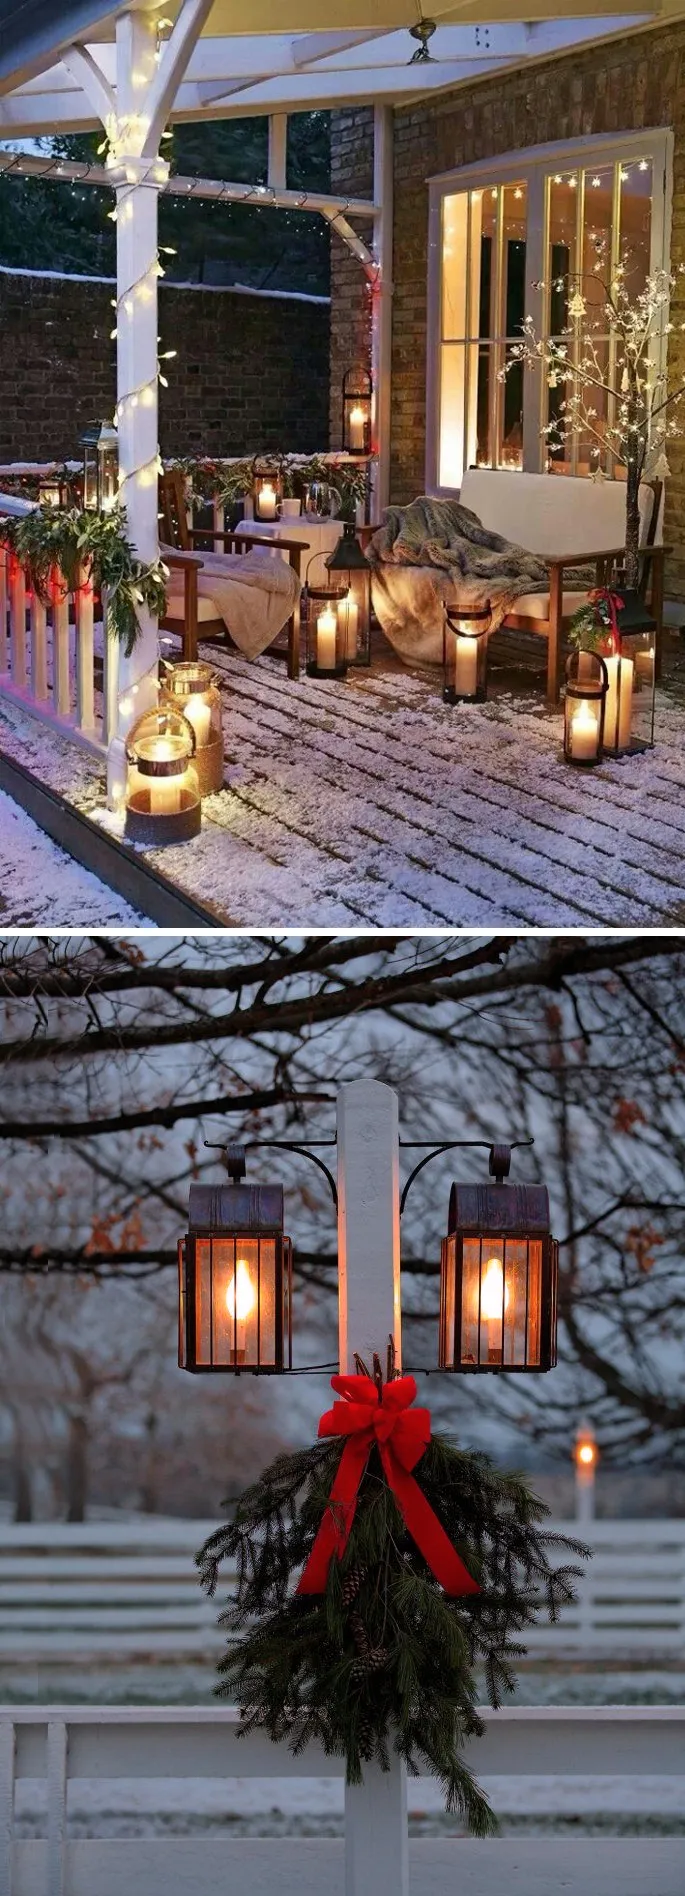 Cute Post Lights To Keep Your Yard Festive During The Holidays